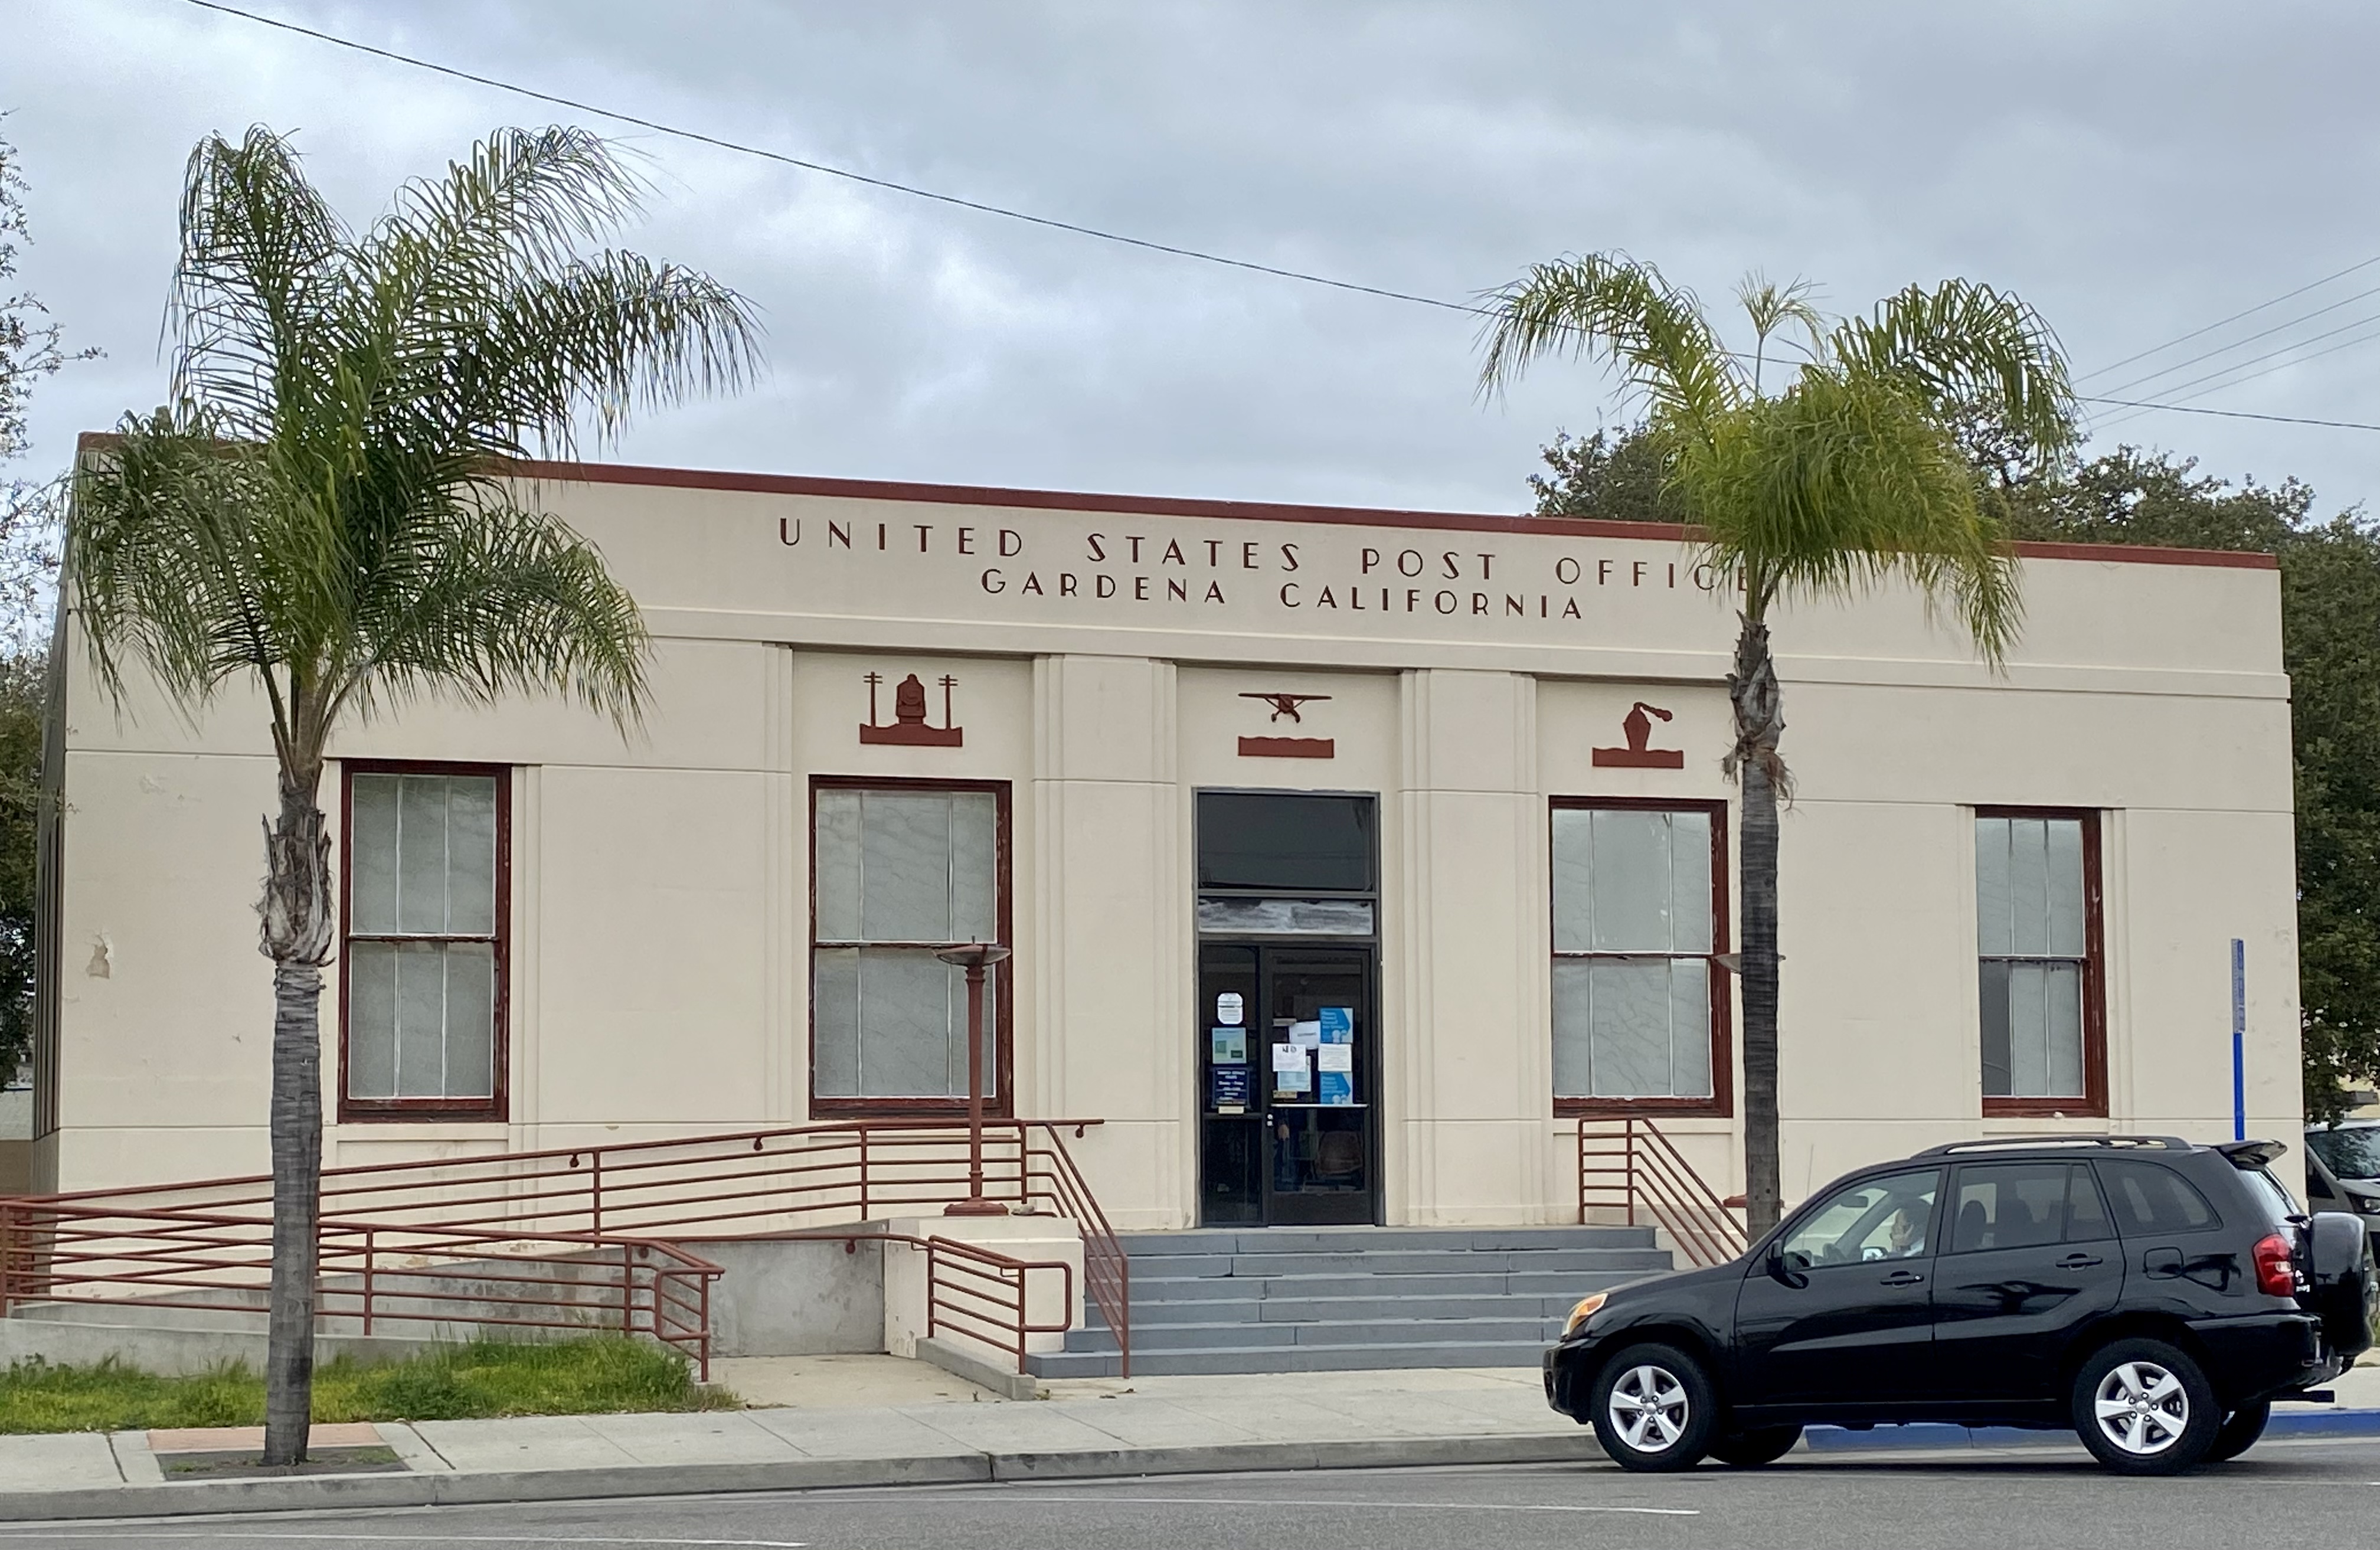 The United States Post Office in Gardena